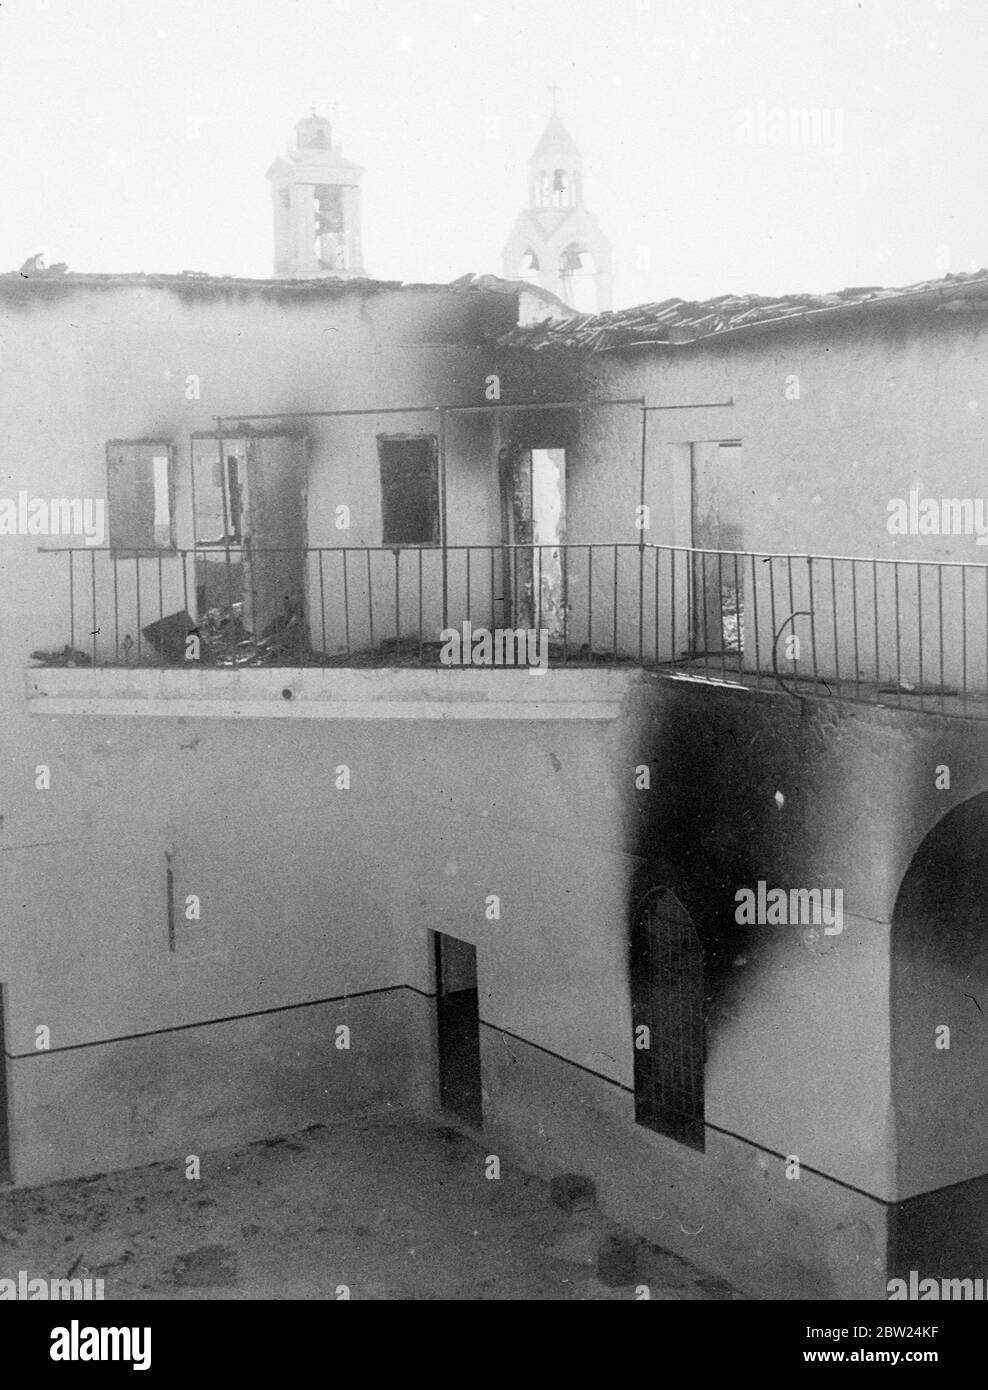 The most daring exploit so far of the Arab rebels in Palestine was the invasion of Bethlehem. The chief object of attack was the post office in police station, both have been gutted during the rebels occupation of the city. The police station was situate where Christ was born. Photo shows: Part of the burnout police station building. The station was on the ground floor and the law court on the first floor. In the background are seeing the two spires which surmount the Church of the Nativity. 19 September 1938 Stock Photo